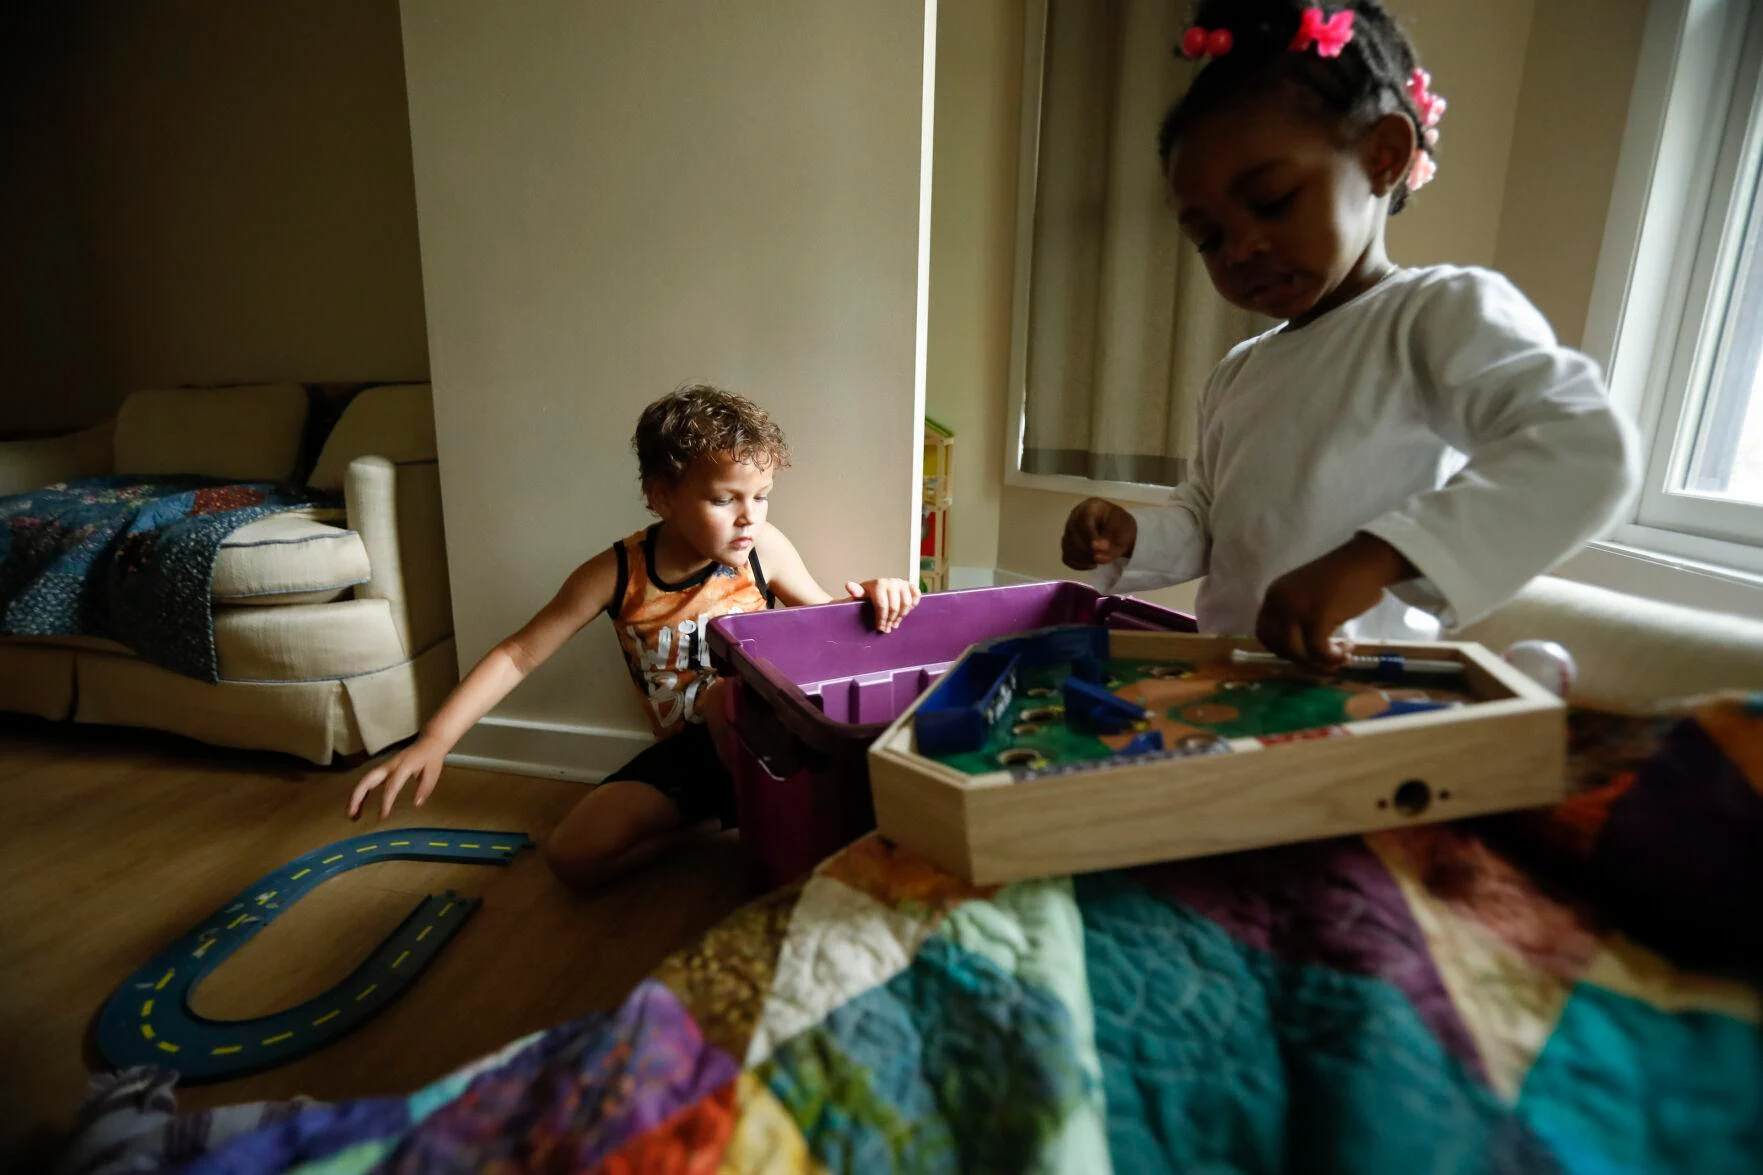 Two children play in the playroom of the Healing House